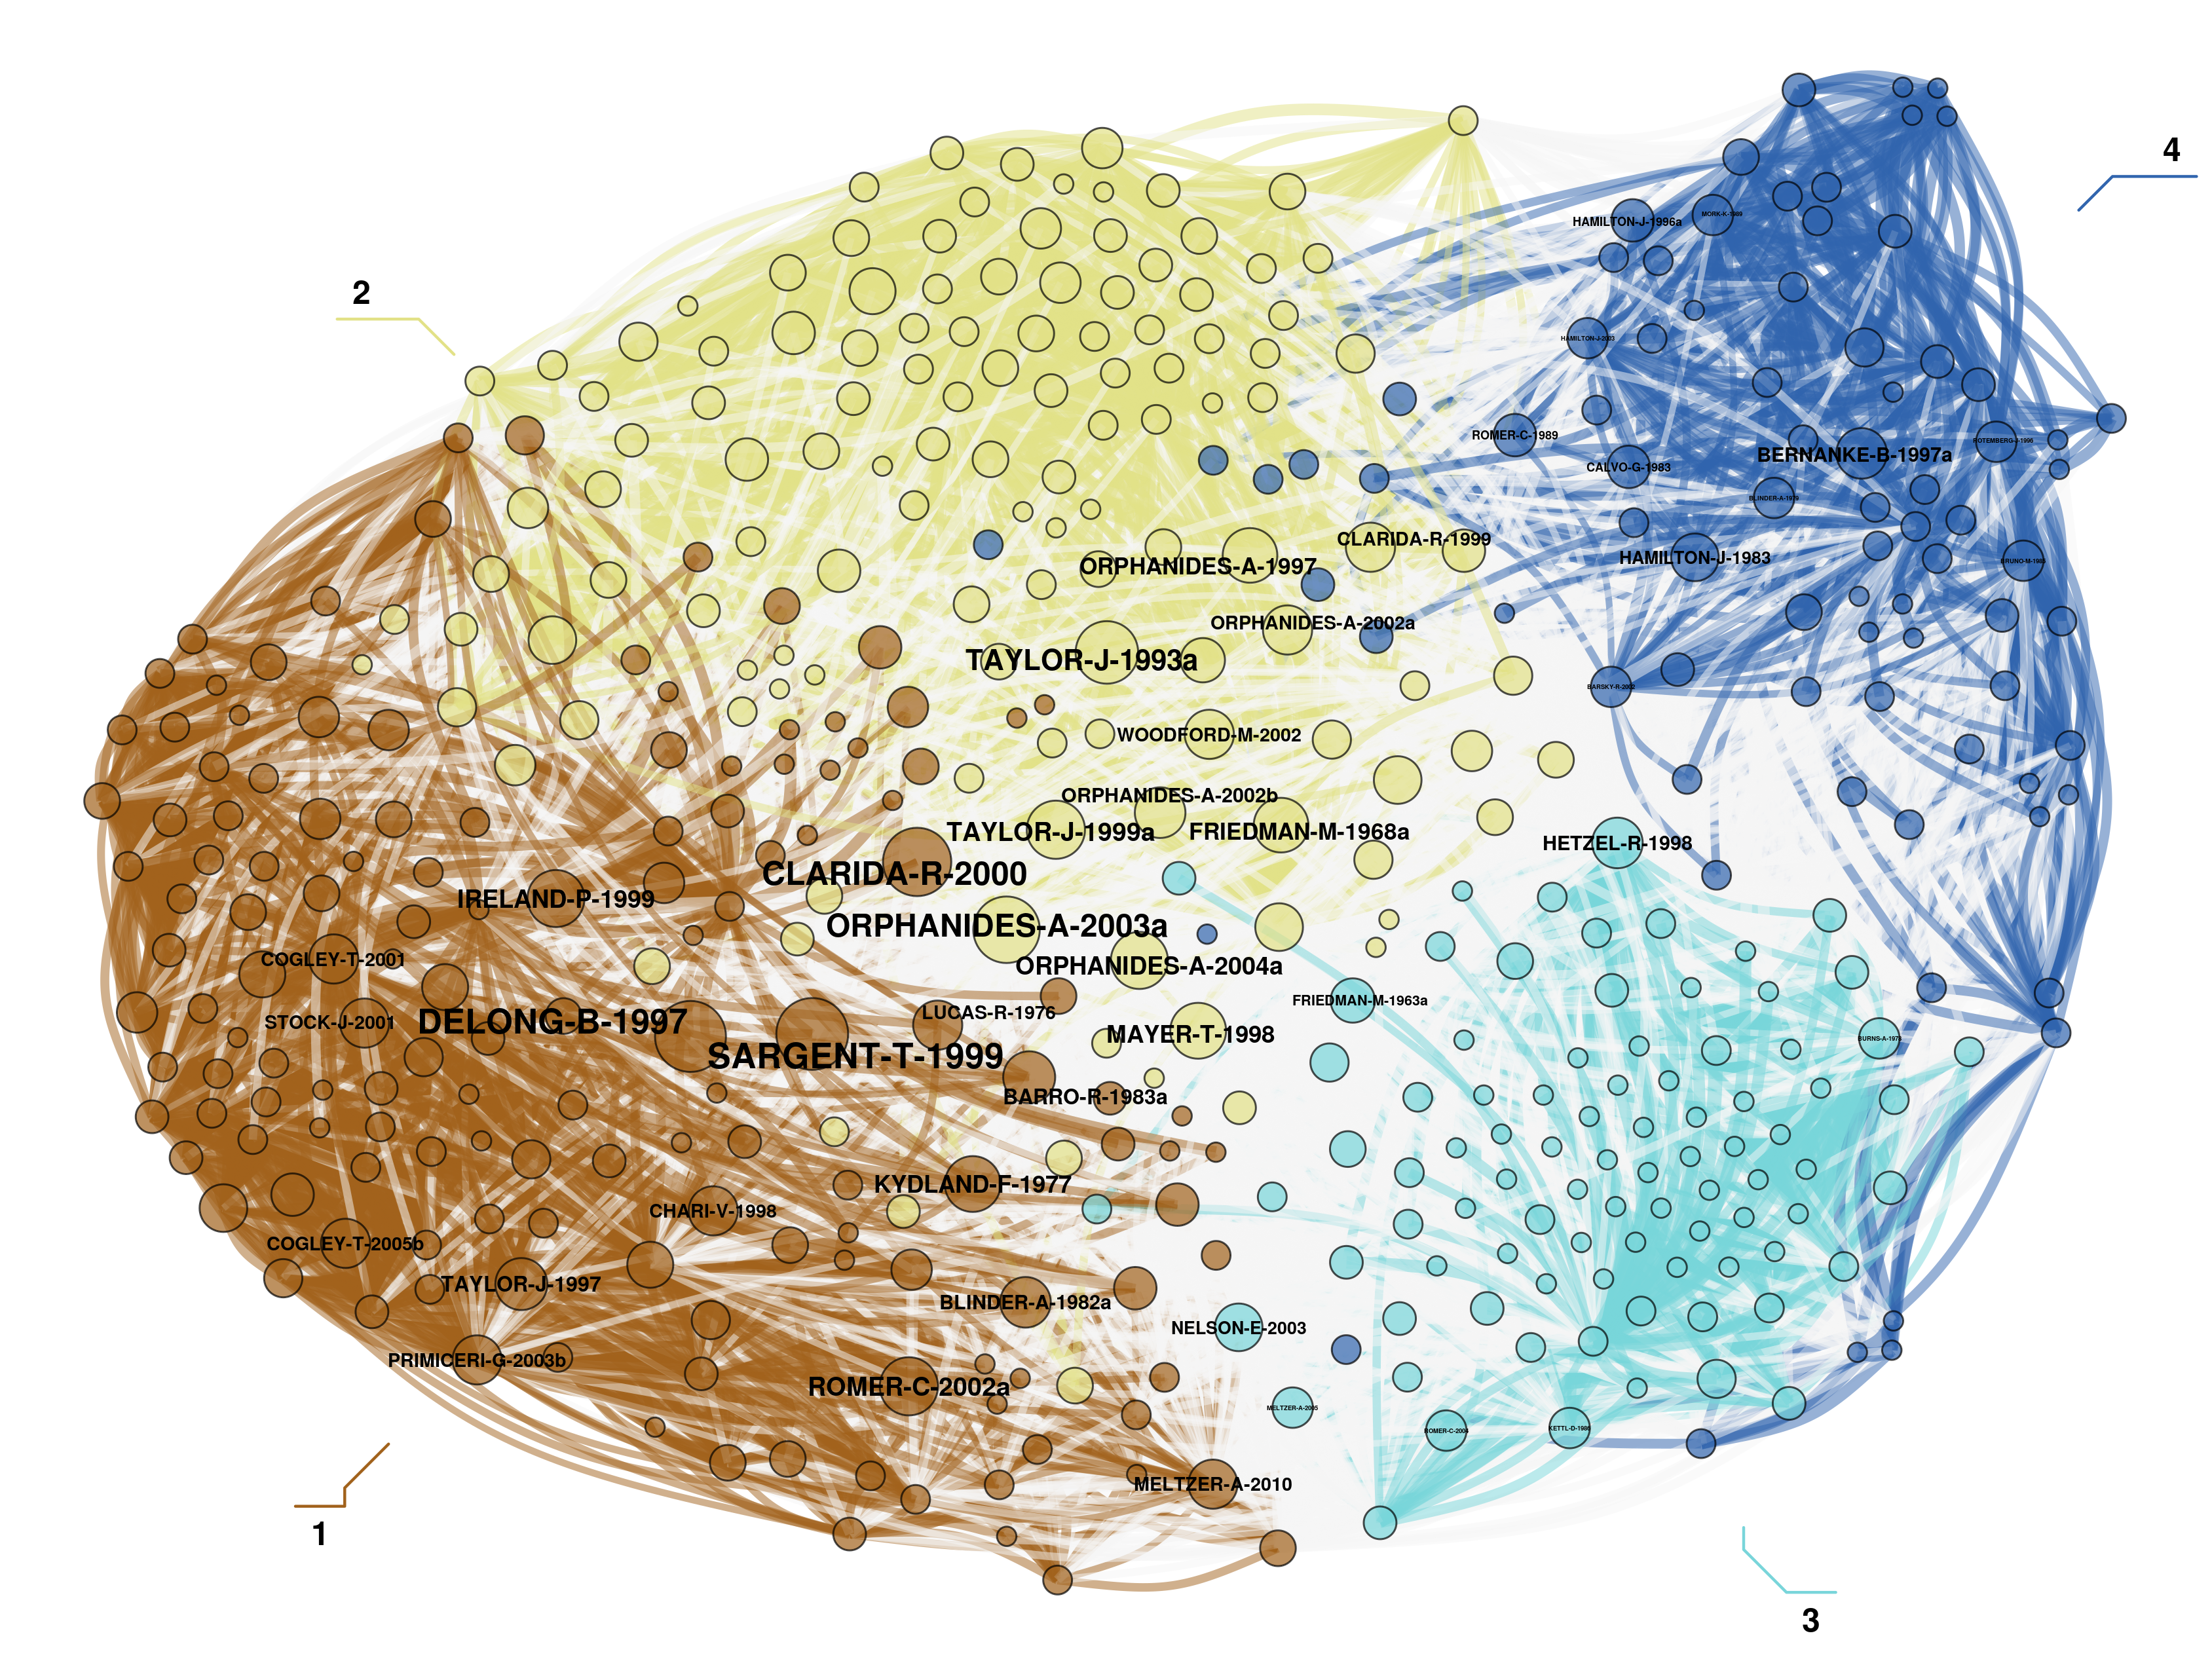 My co-citation network for the 1997-2013 sub-period